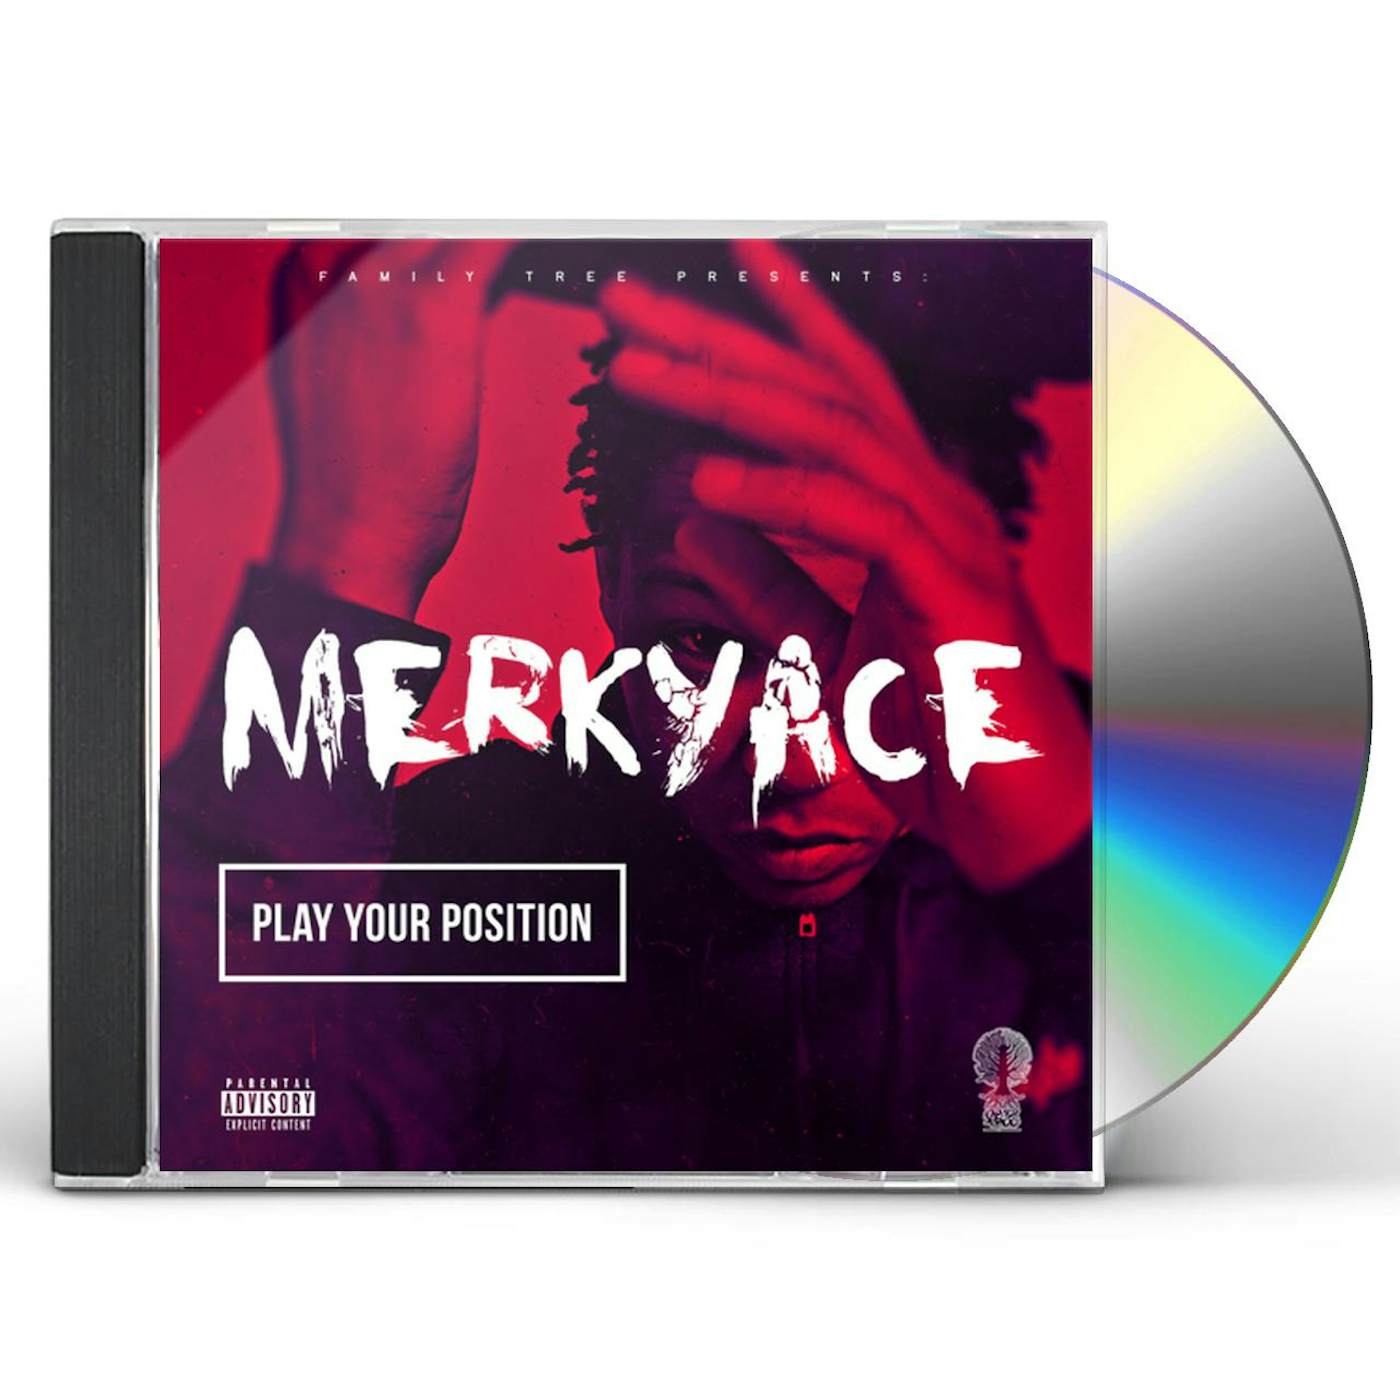 Merky ACE PLAY YOUR POSITION CD